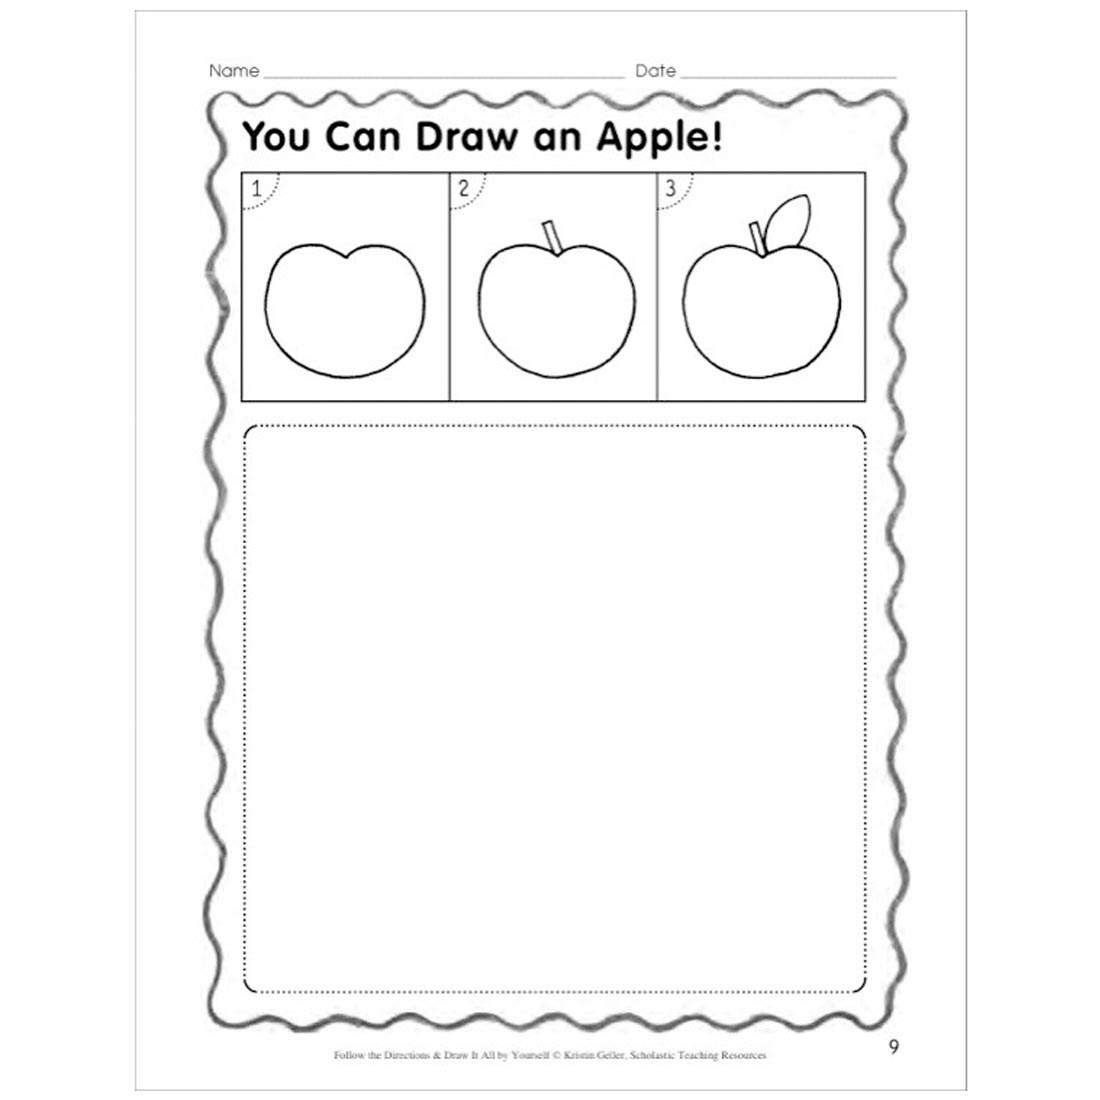 ou Can Draw an Apple! from the book Scholastic Follow the Directions & Draw It All by Yourself